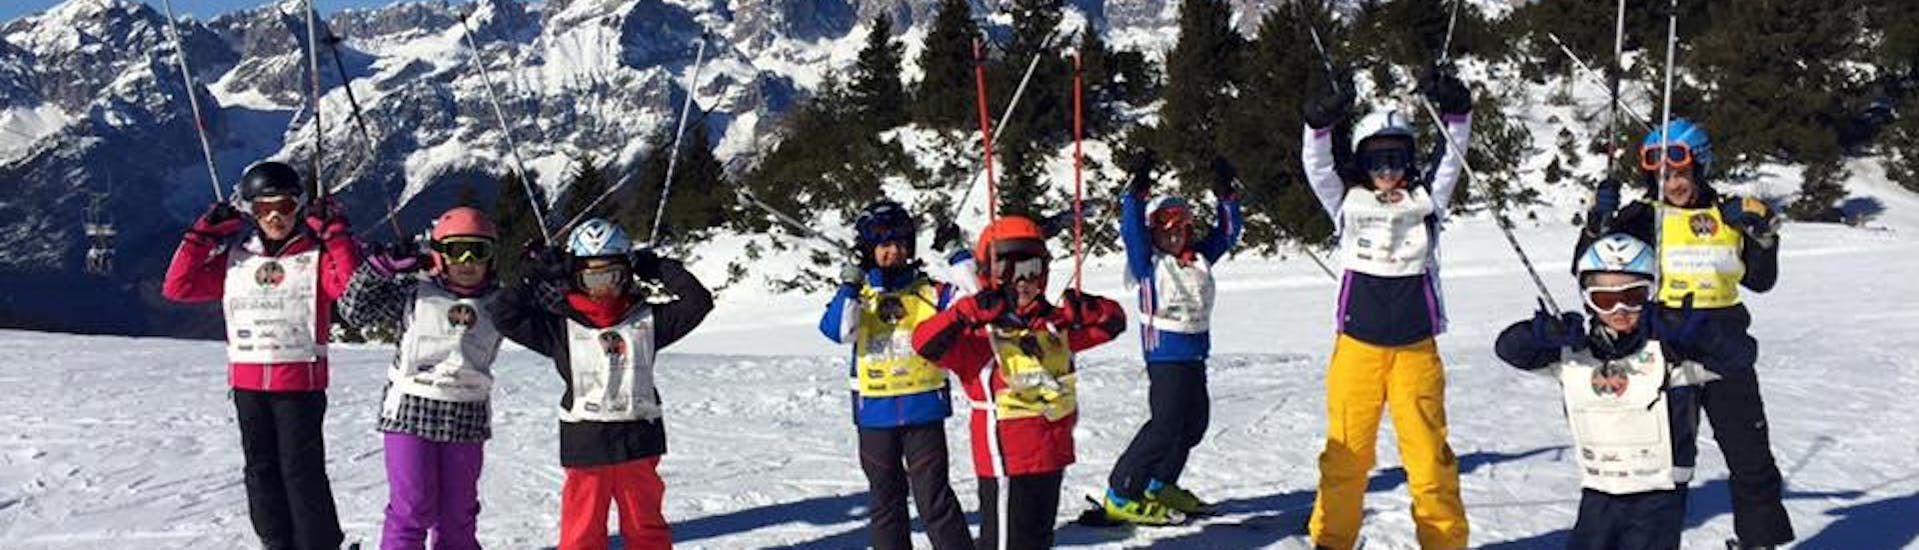 Kids happy in Andalo during one of the Kids Ski Lessons "Baby Elite" (4-5 y.) for First Timers.